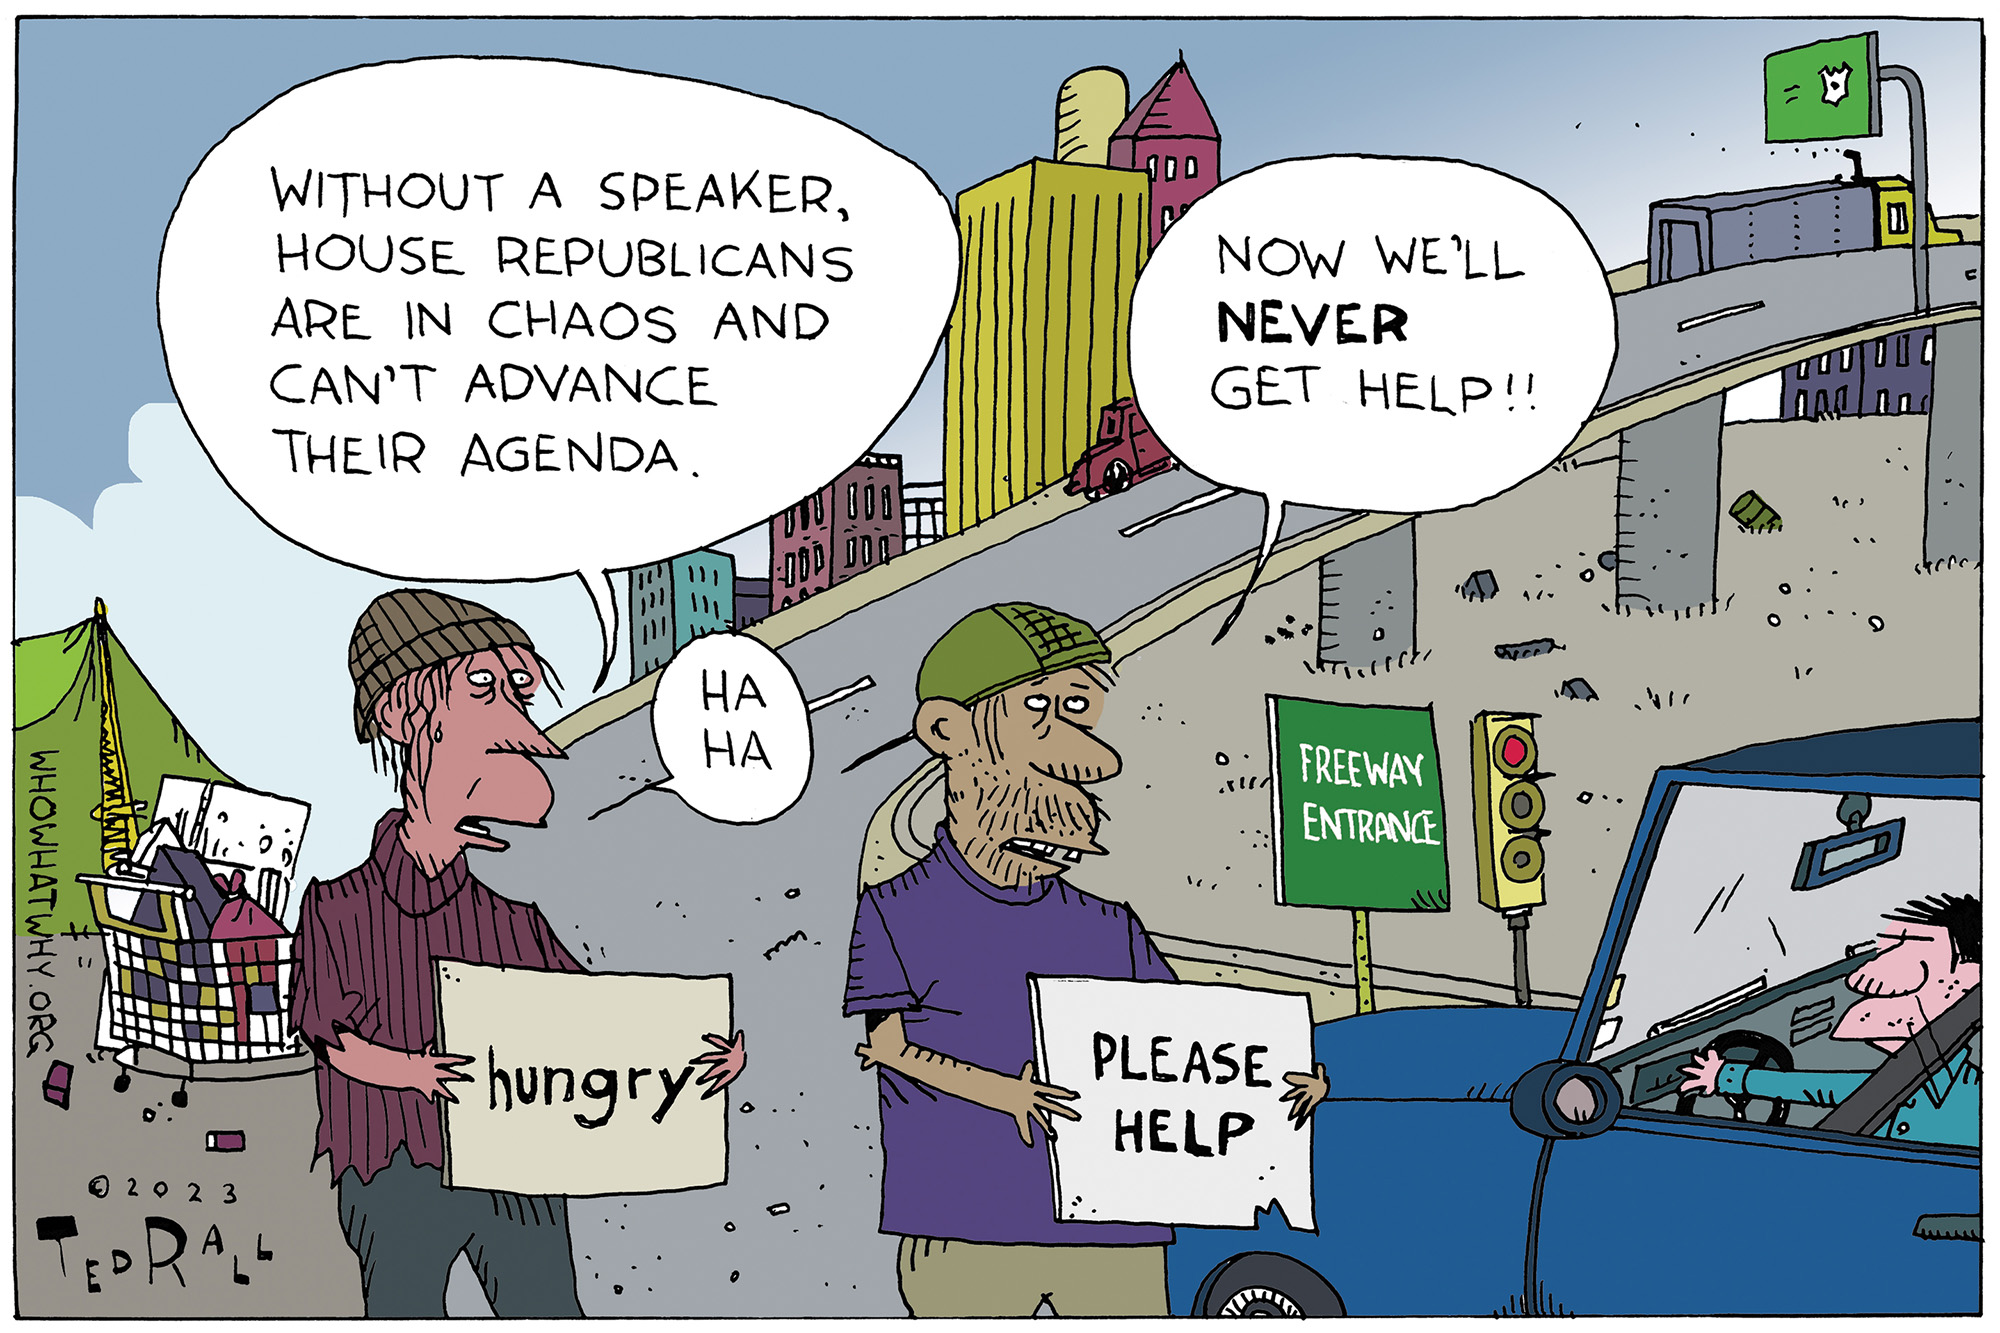 GOP, Speaker of the House, poverty